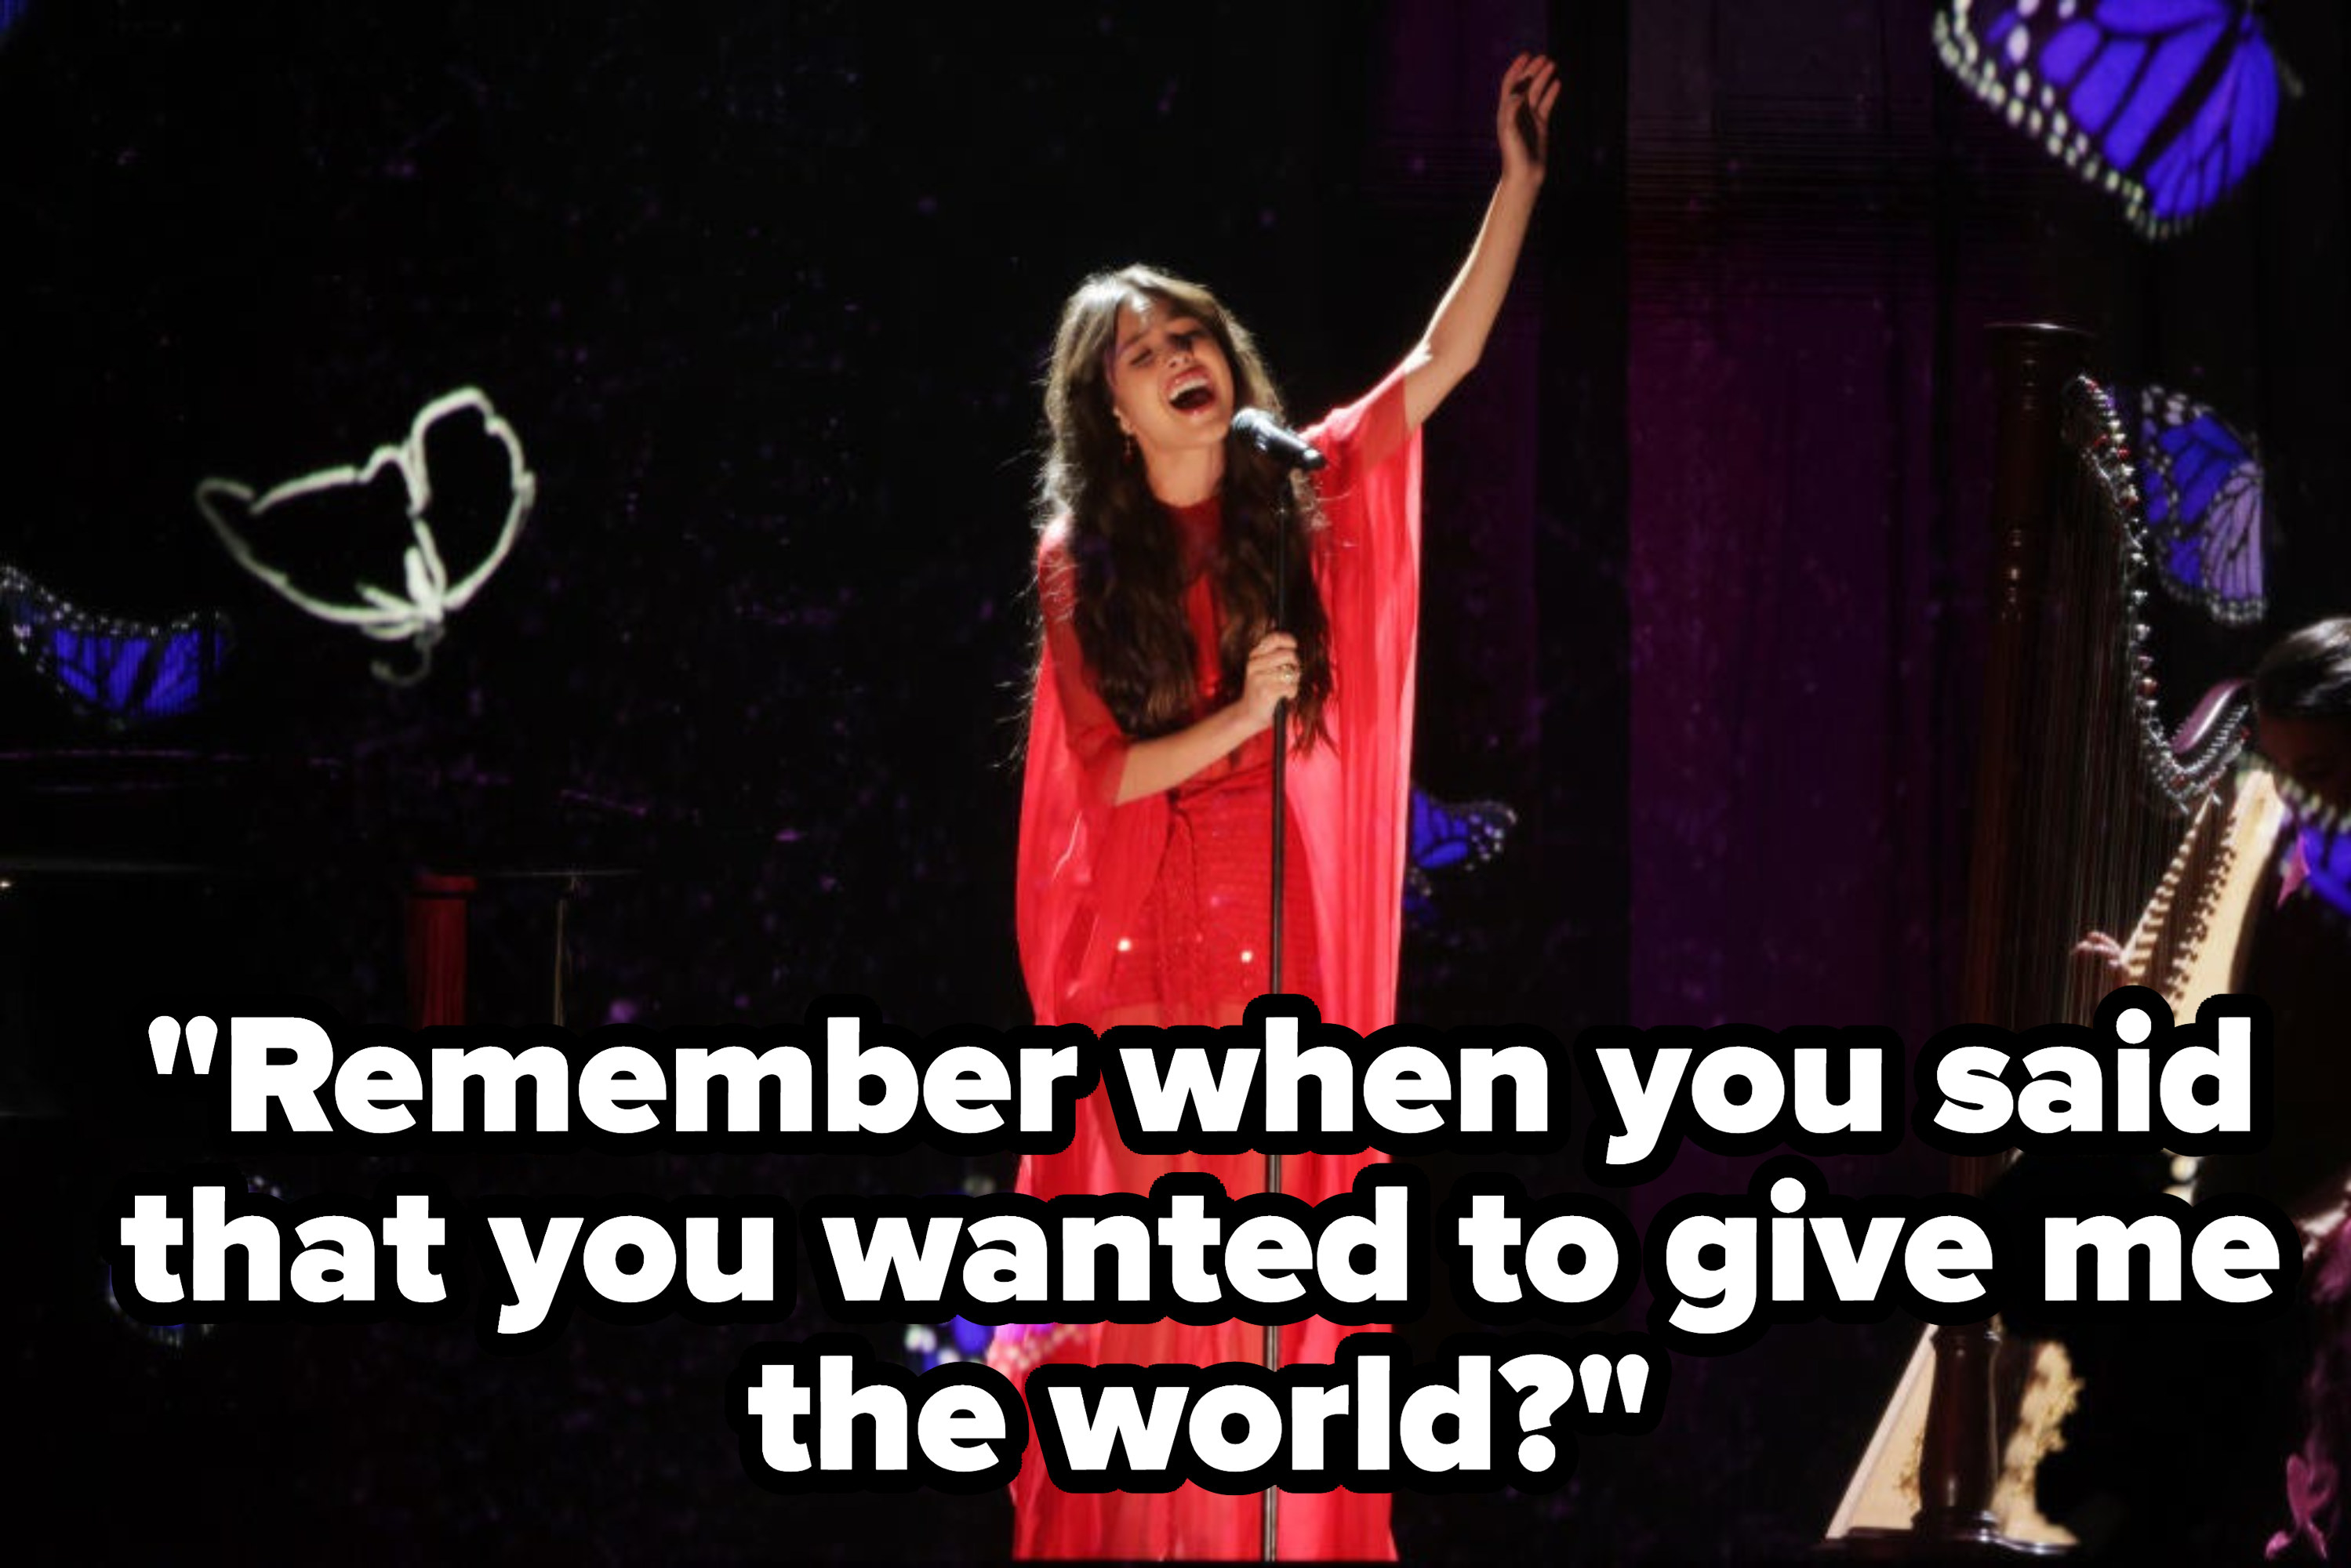 &quot;Remember when you said that you wanted to give me the world?&quot;